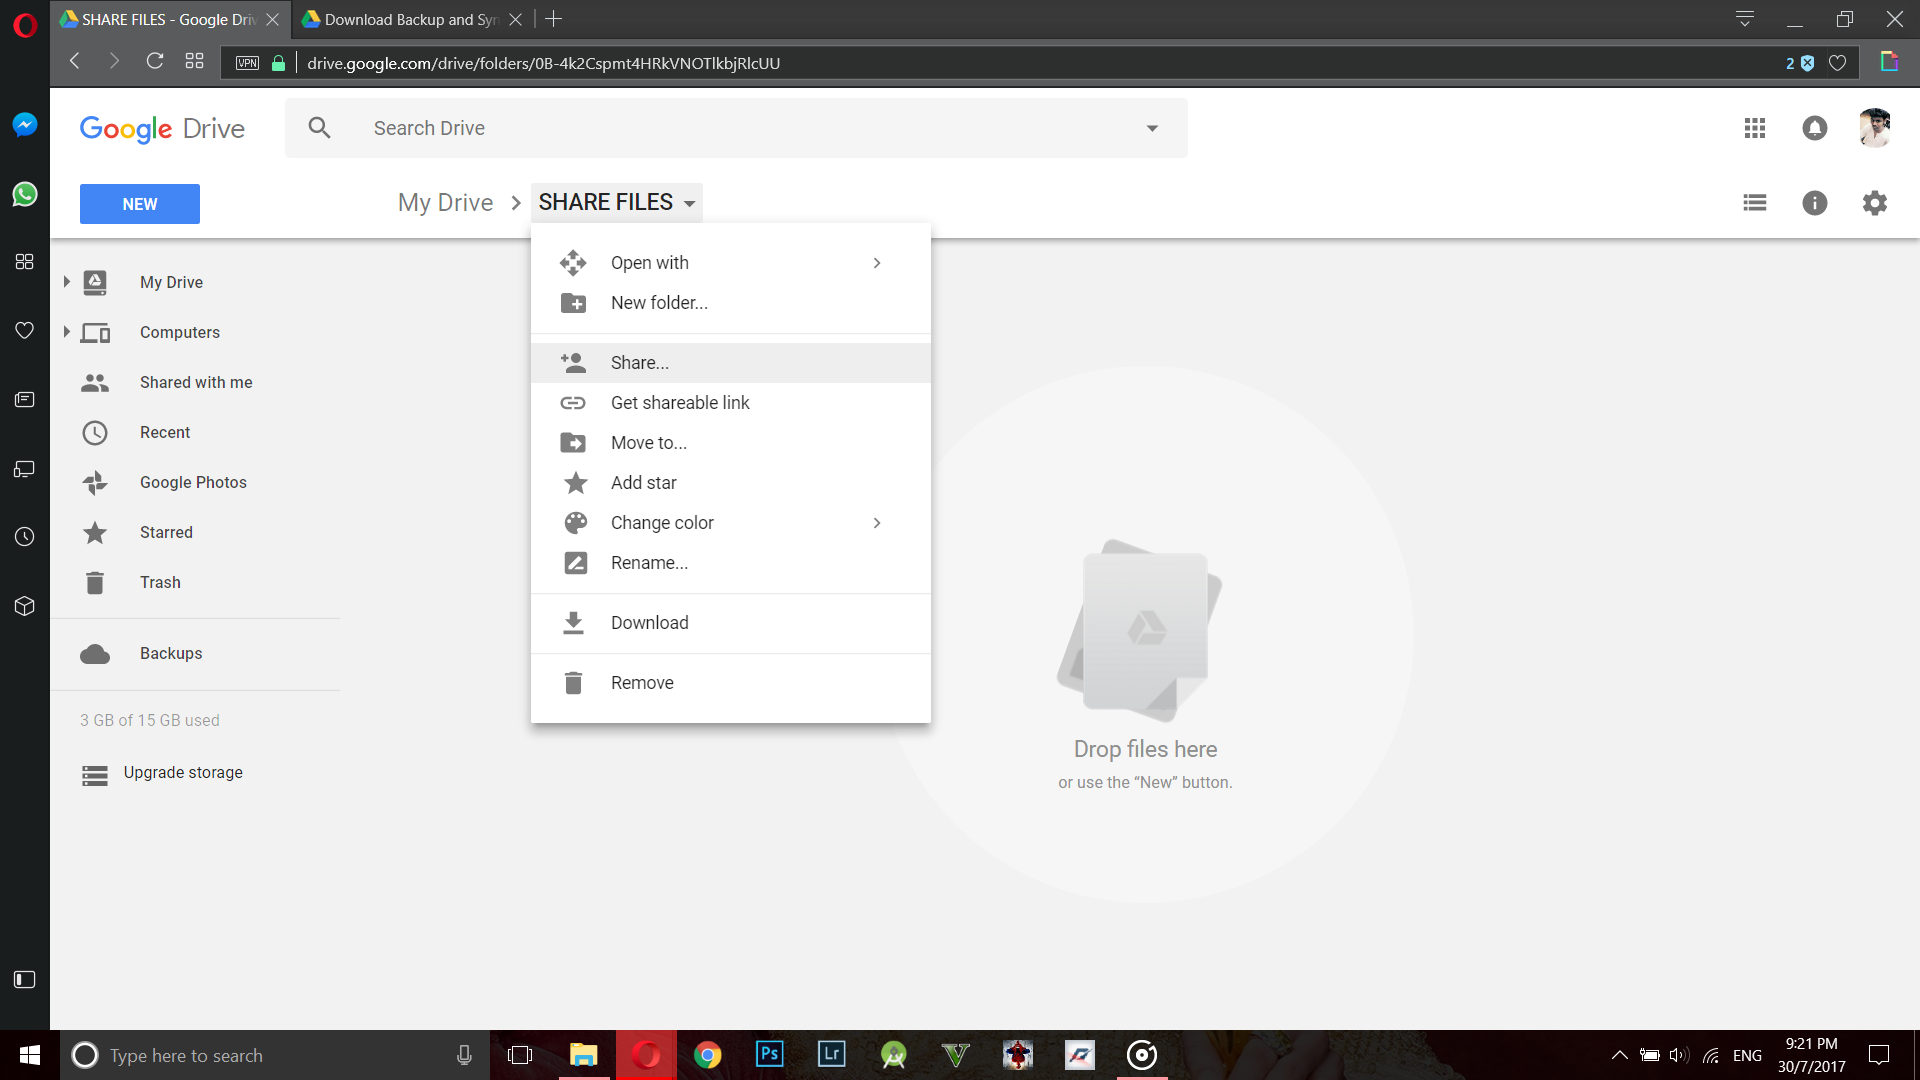 Upload FIles To Anyone's Google Drive